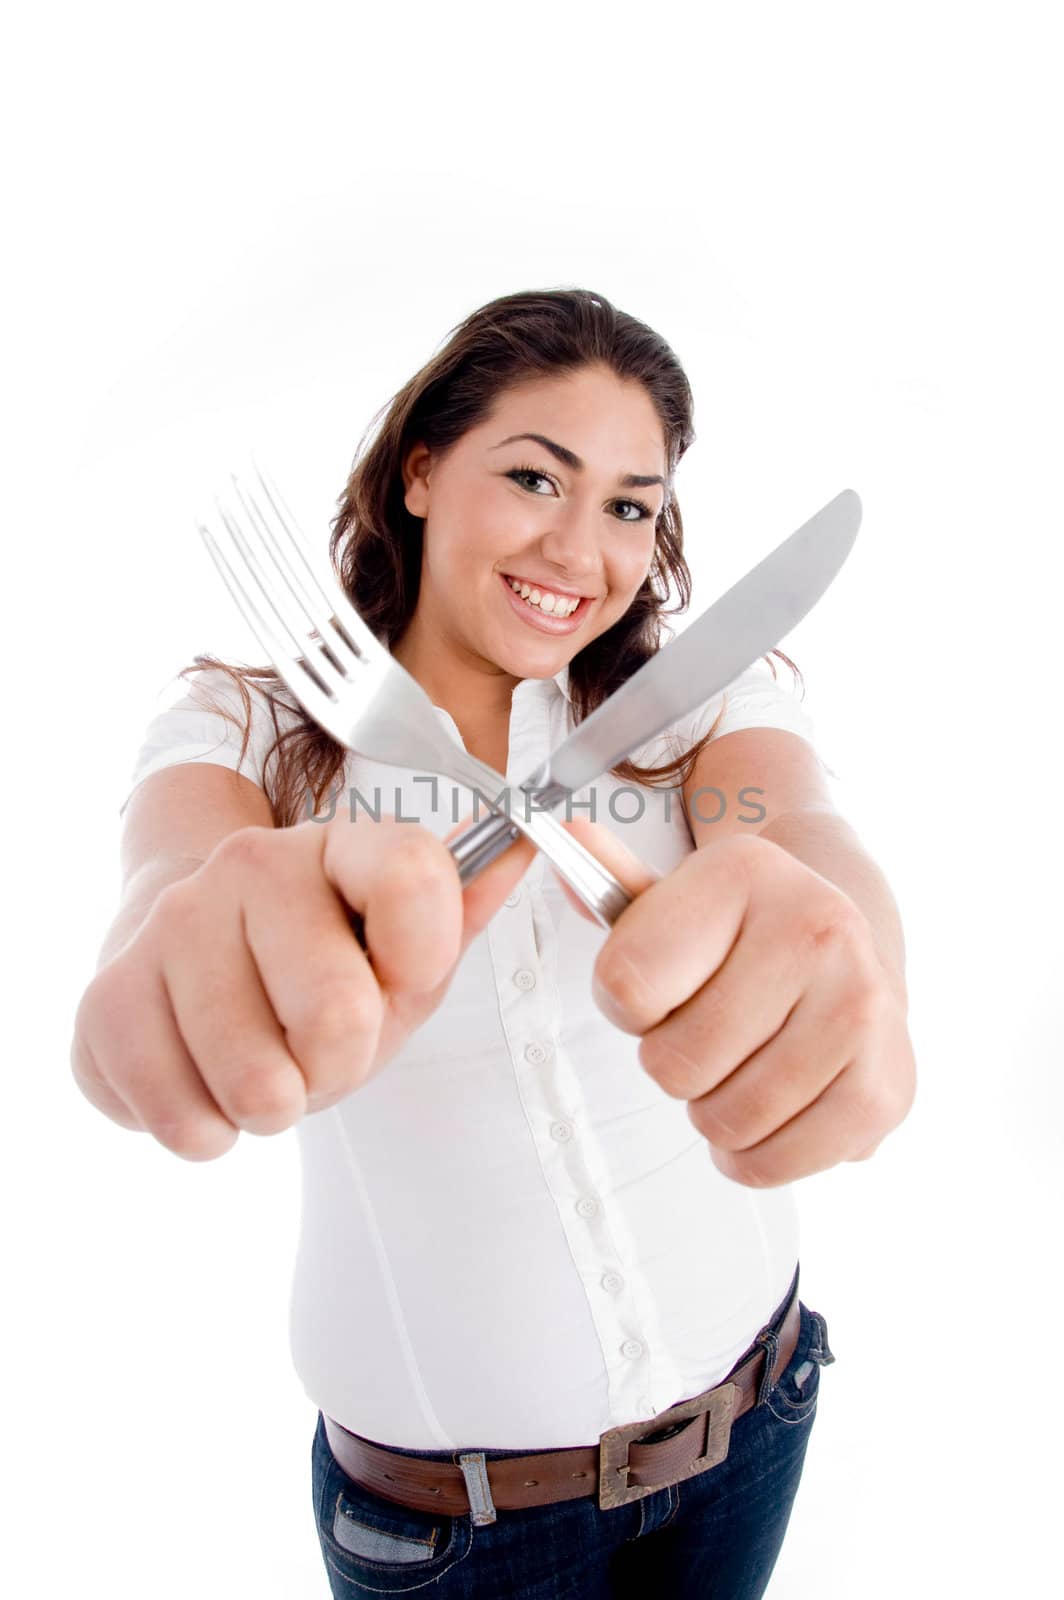 young model holding fork and knife by imagerymajestic